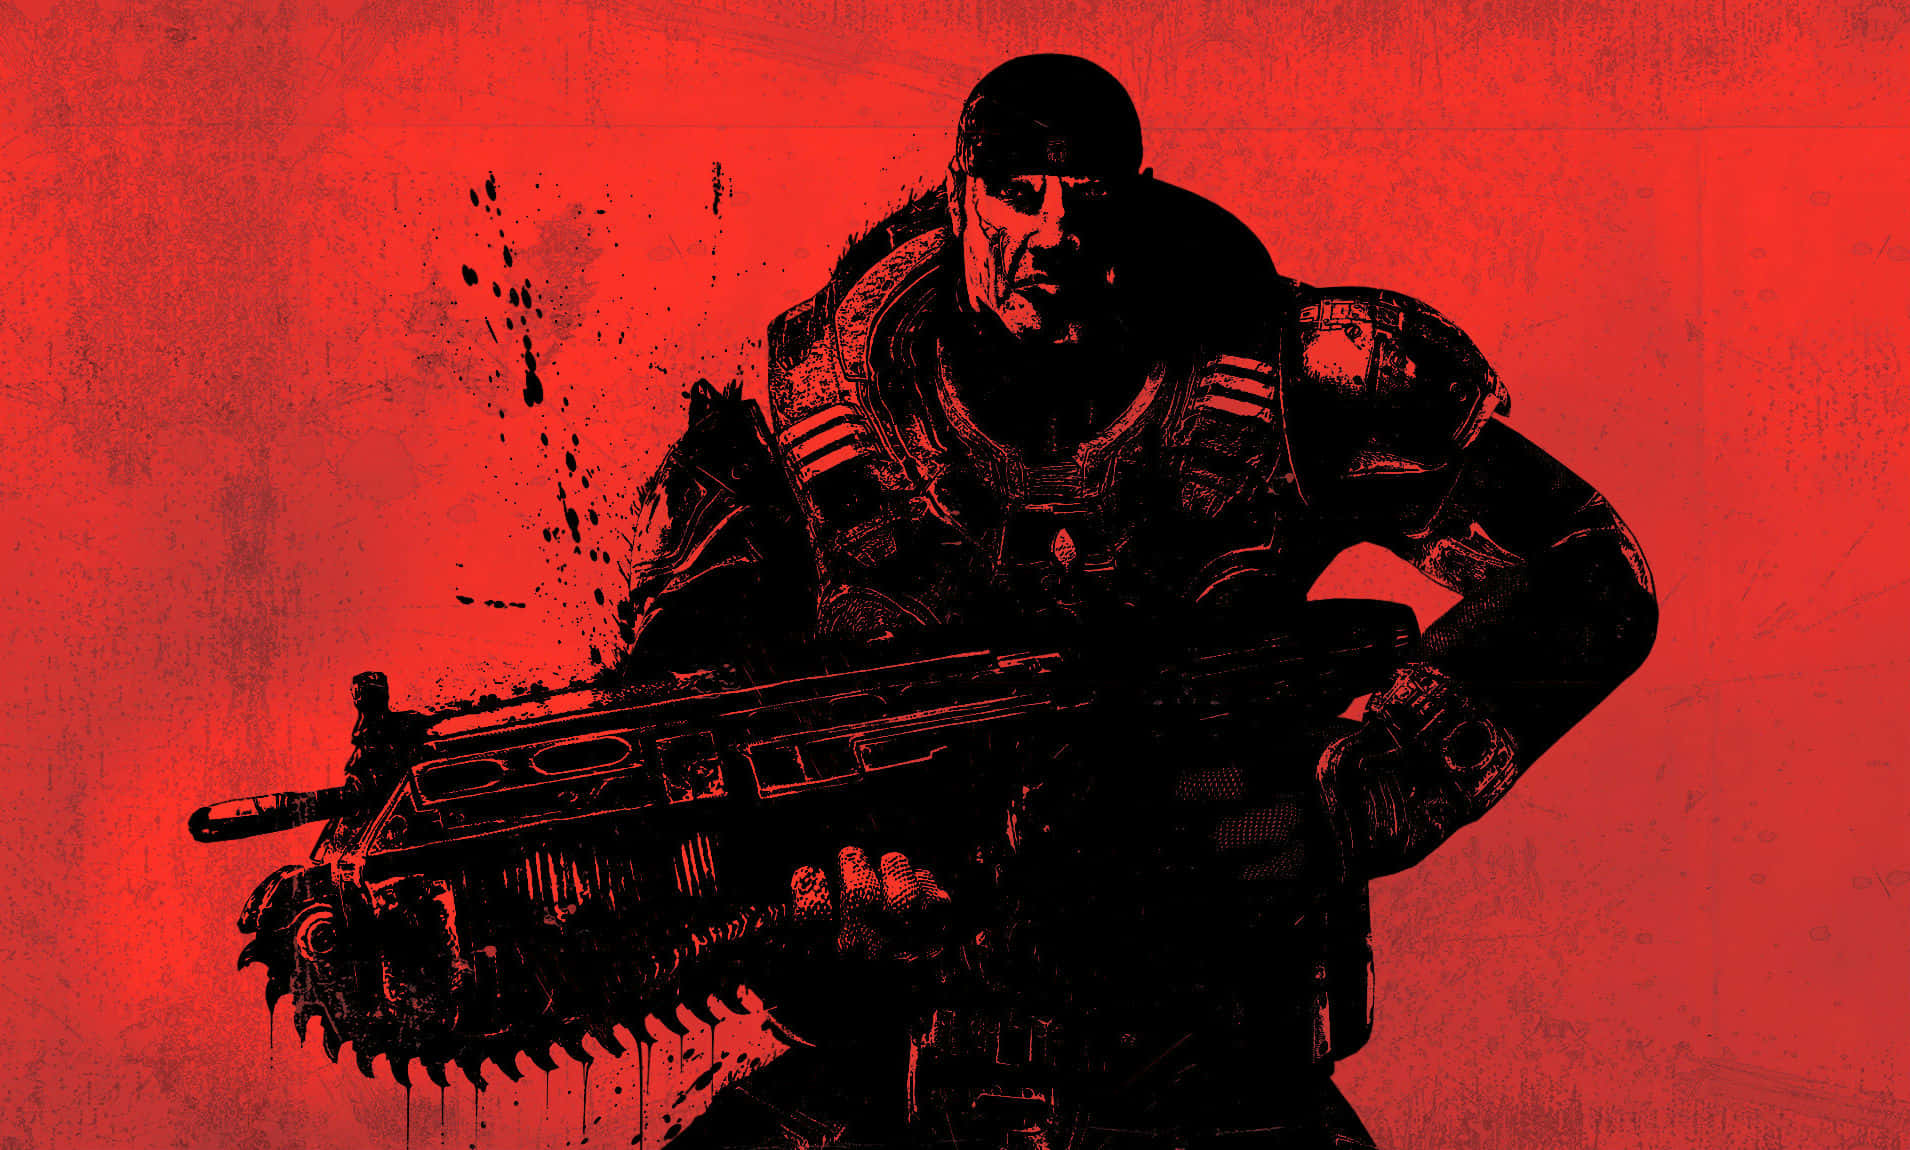 Experience intense action in "Gears of War 1" Wallpaper